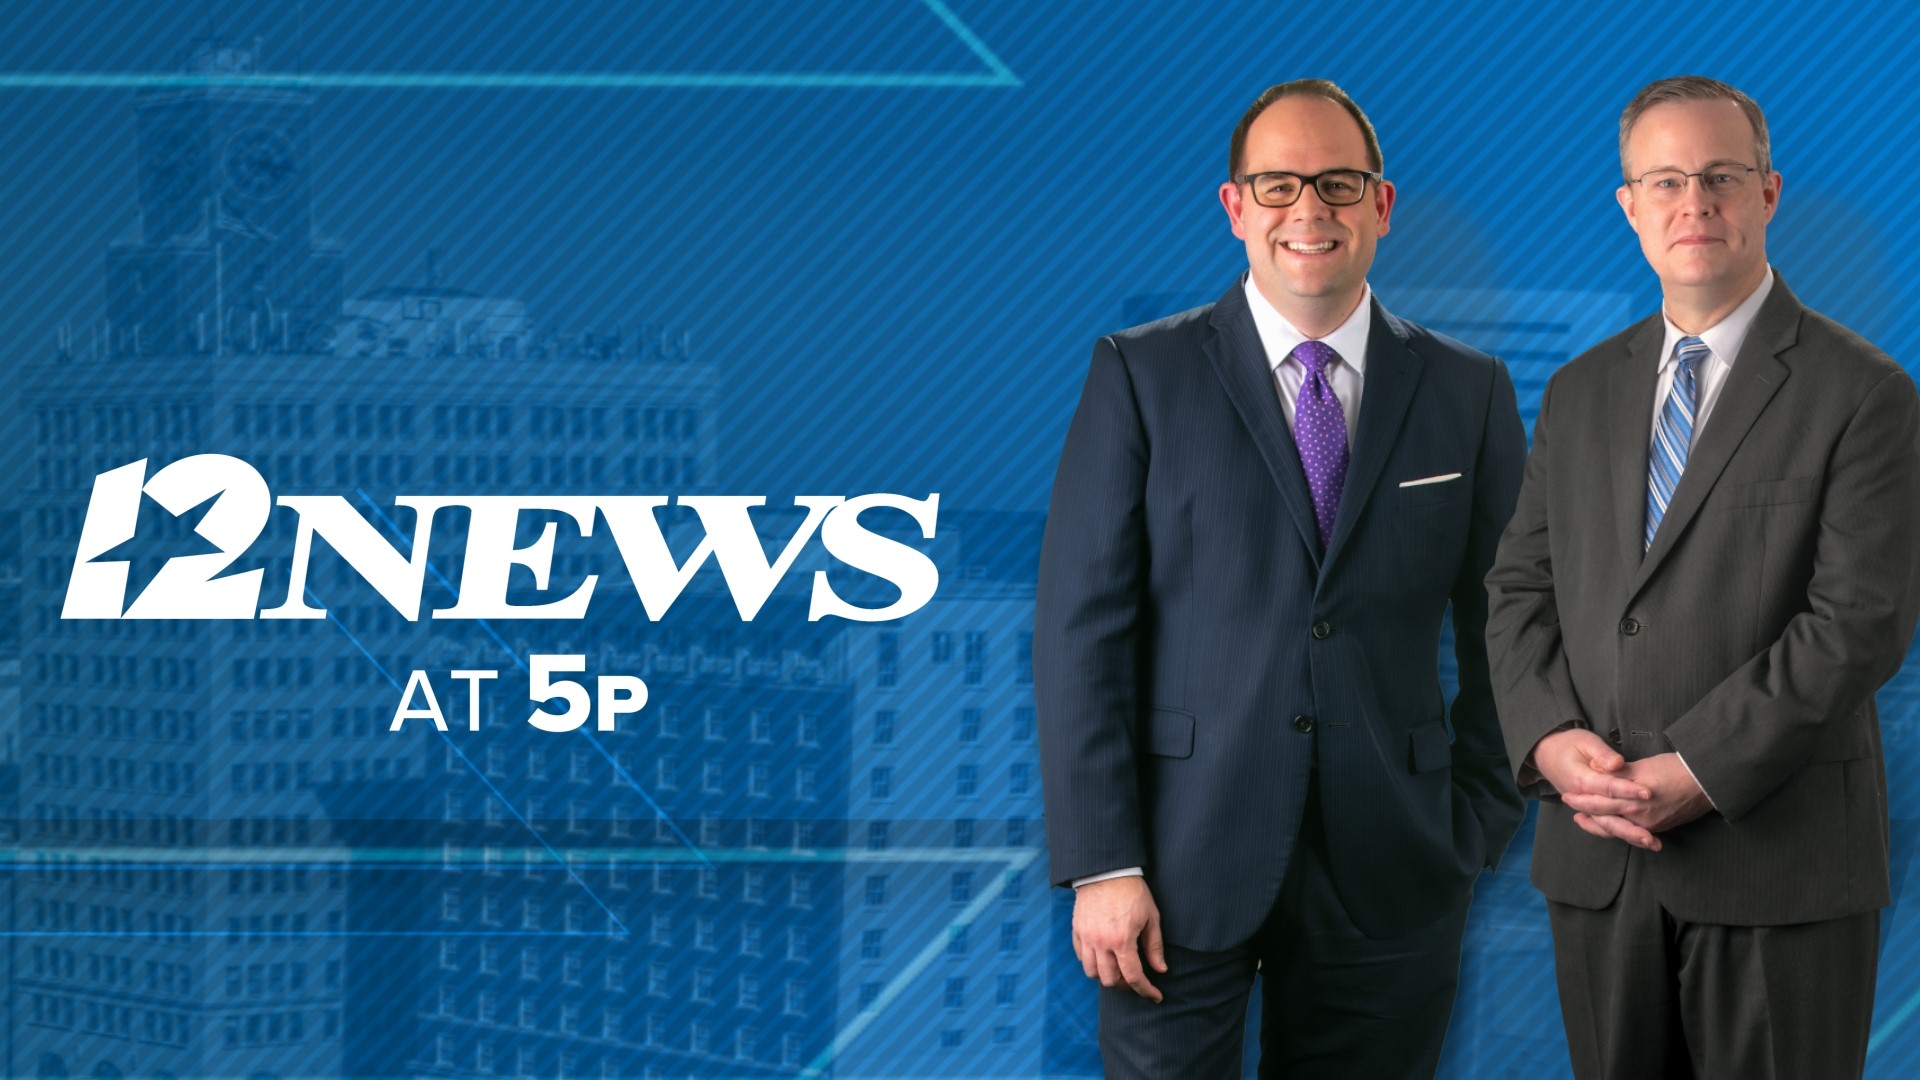 12 News at 5pm has your up to date headlines that put Southeast Texas first.